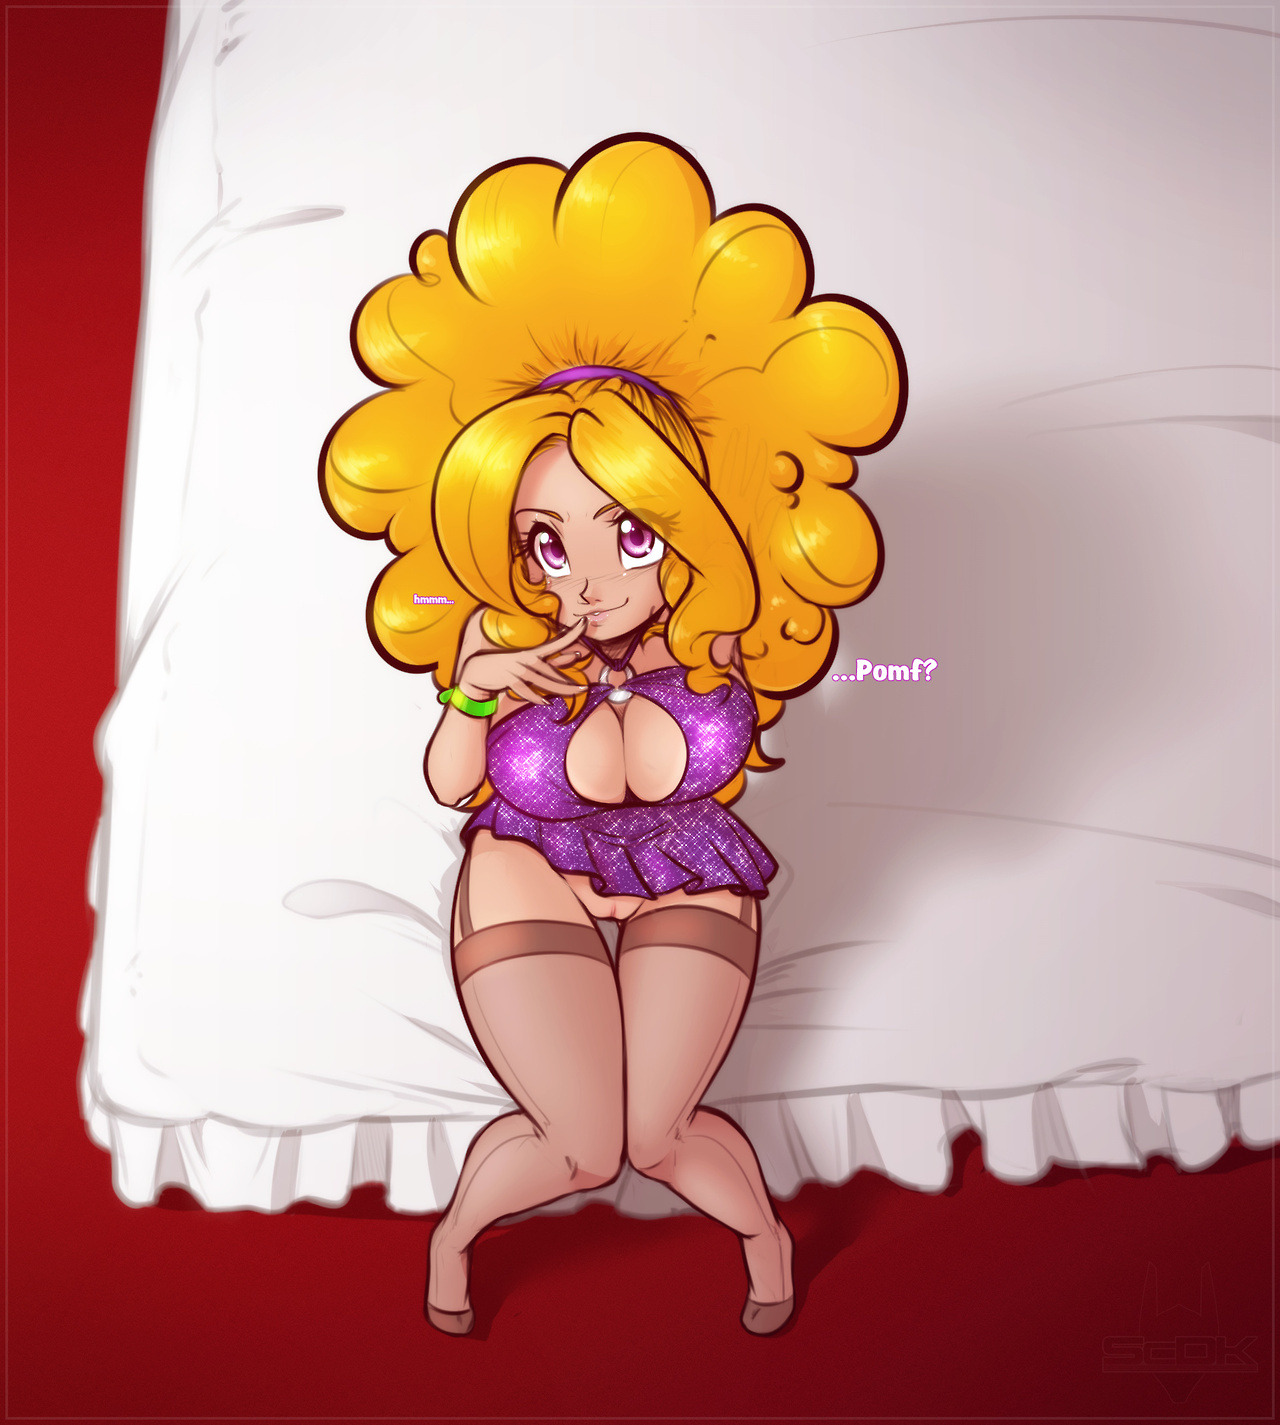 scdk-nsfw: scdk-nsfw:  Adagio - Pomf?Good heavens, just look at the time! Morning